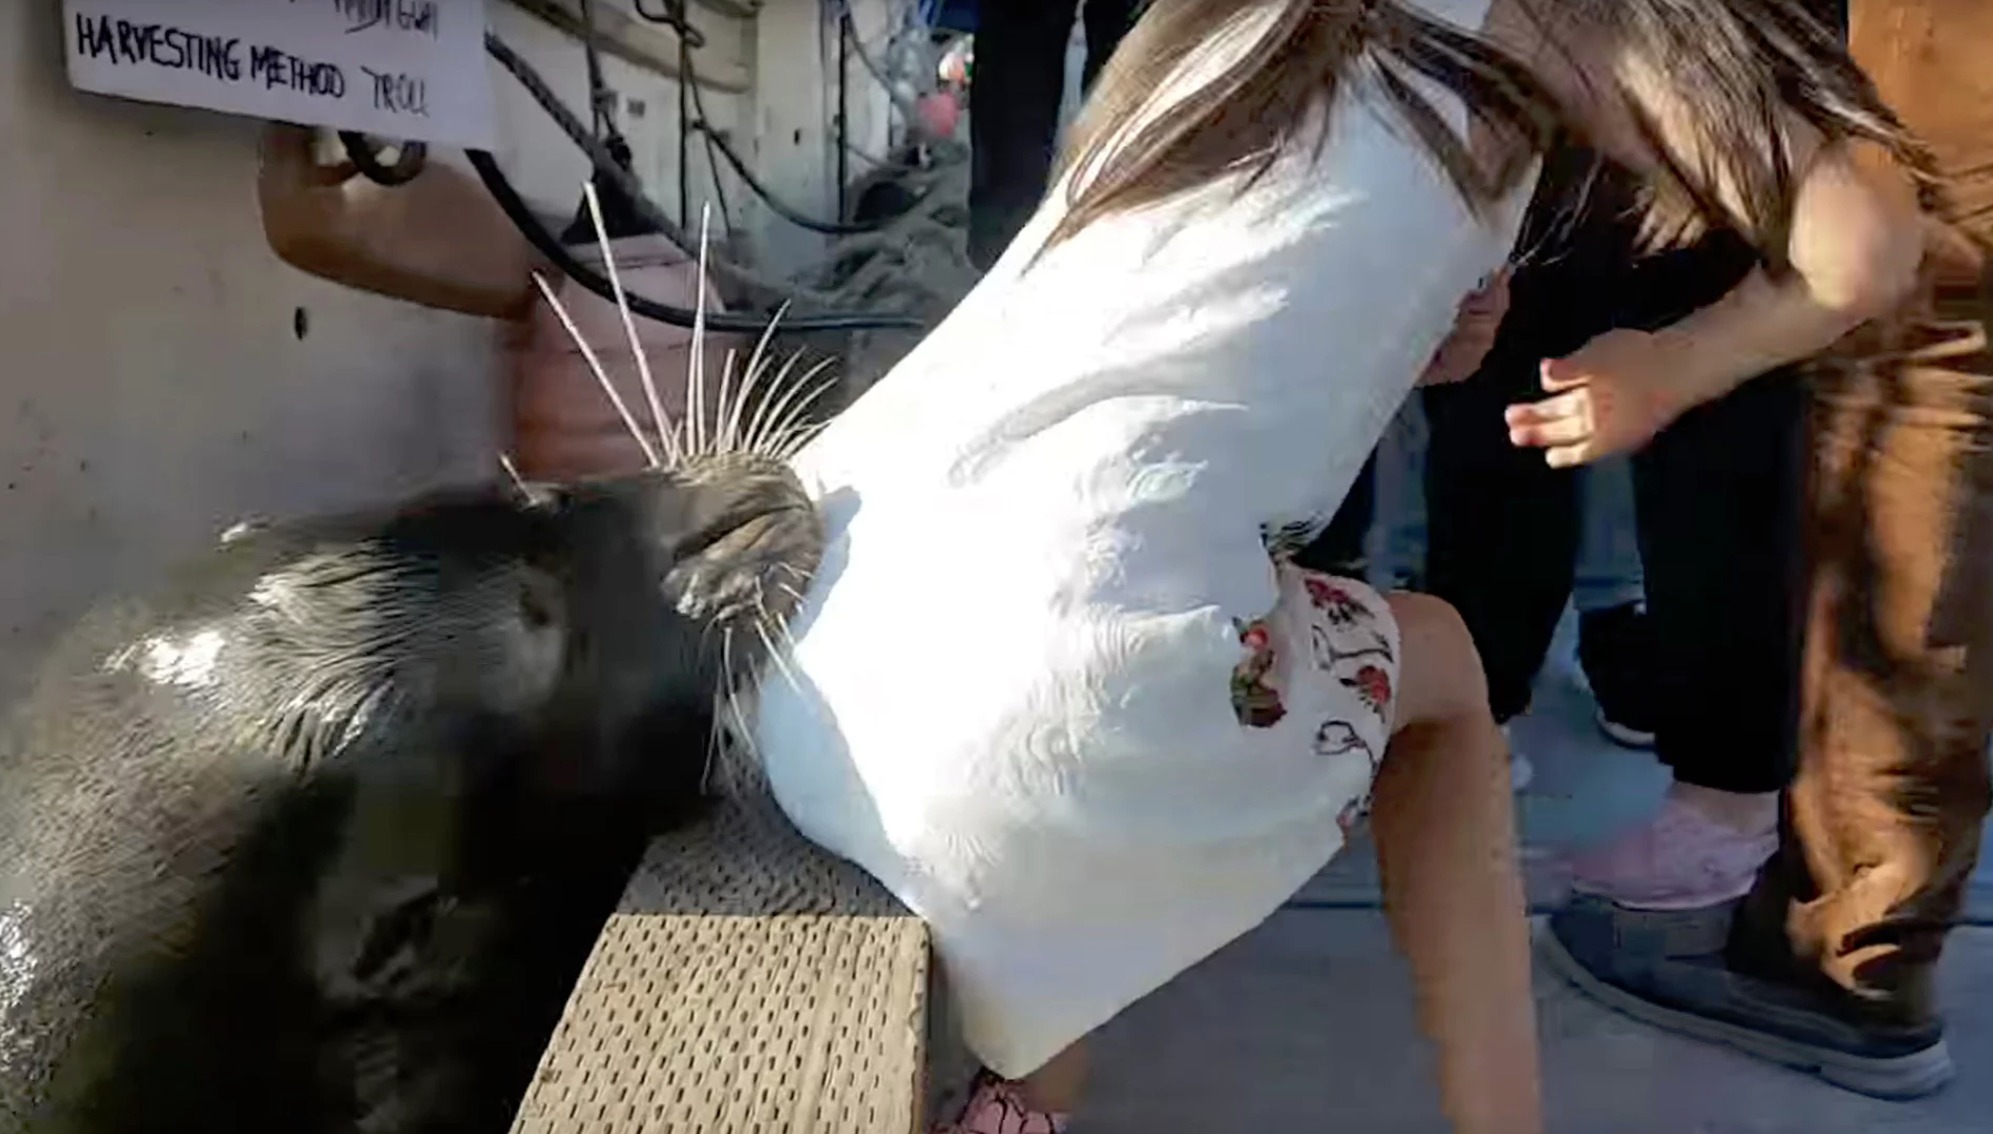 Sea lion grabs young girl from dock, pulls her underwater - CBS News